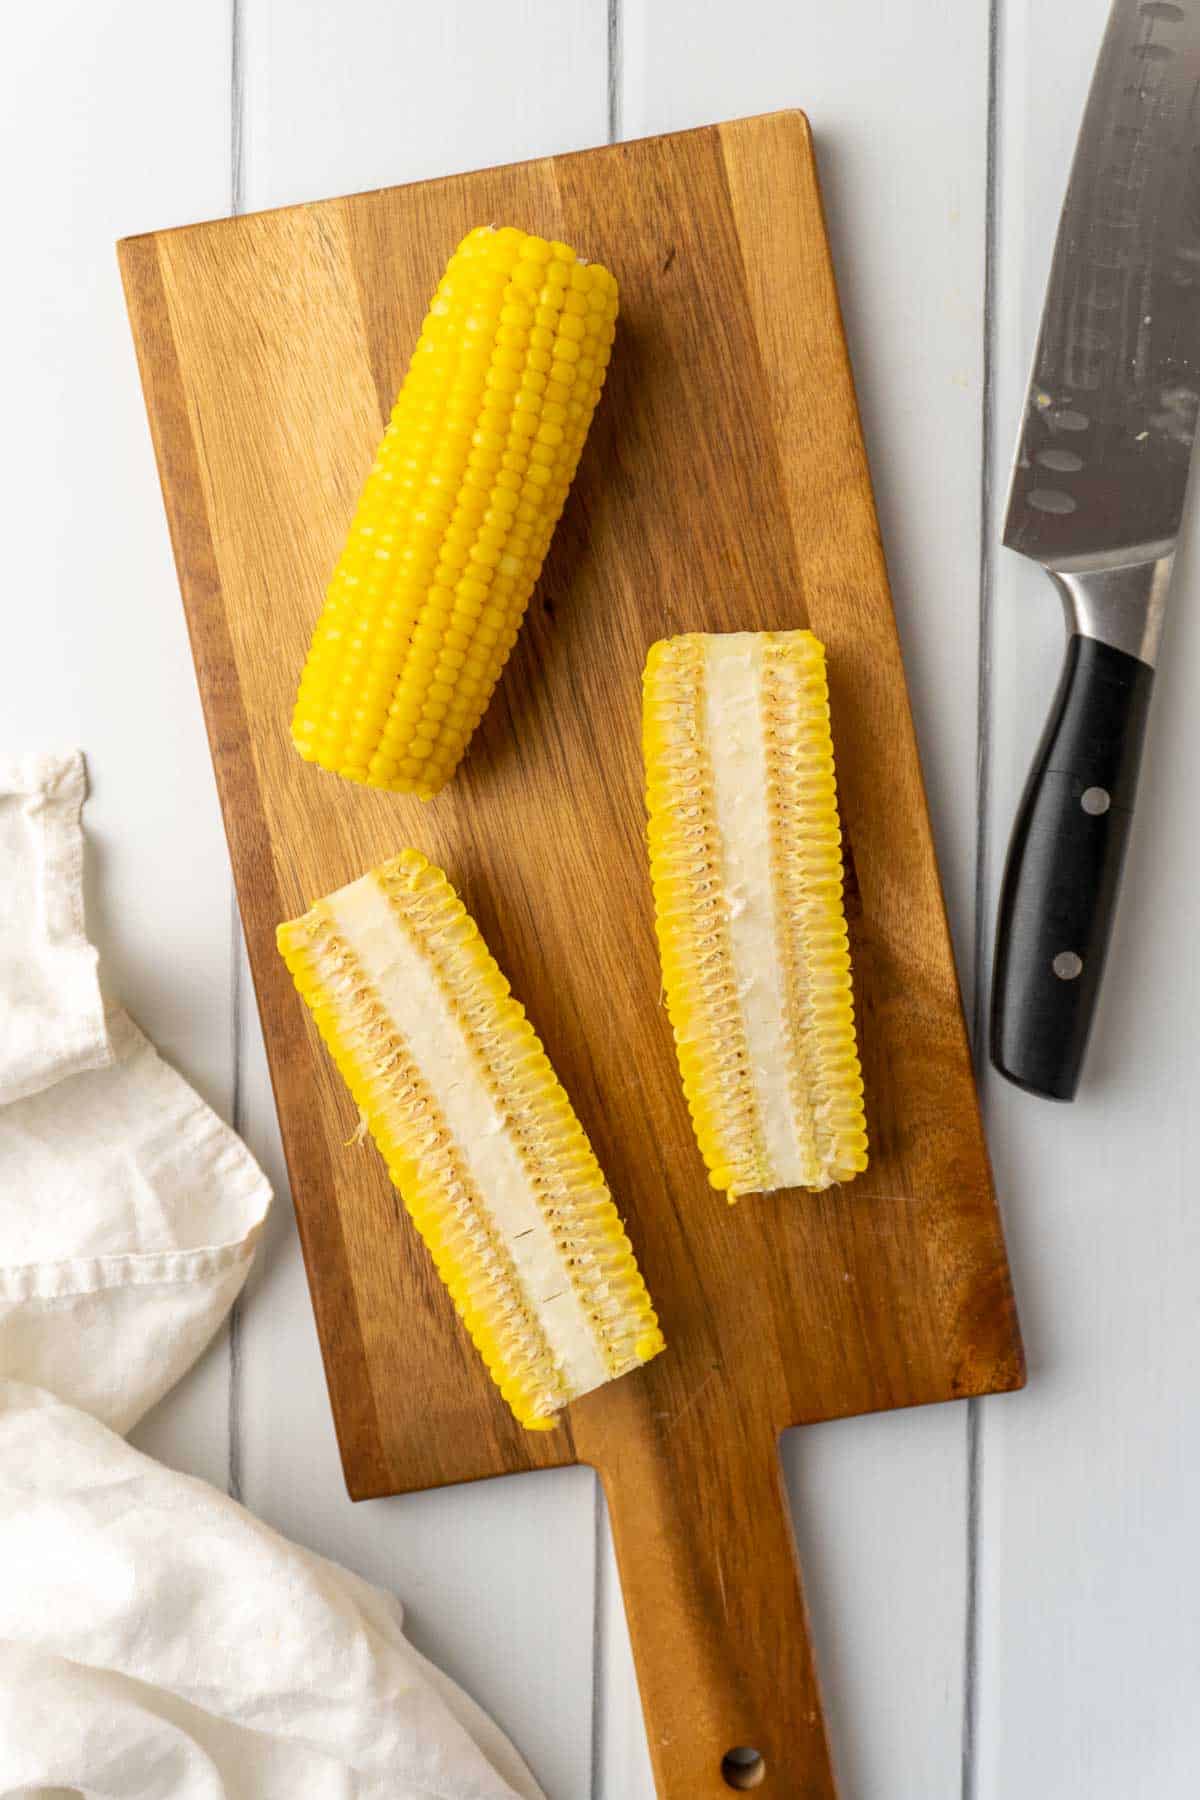 cutting the corn cobs into corn ribs on a wooden board with a white cloth to one side